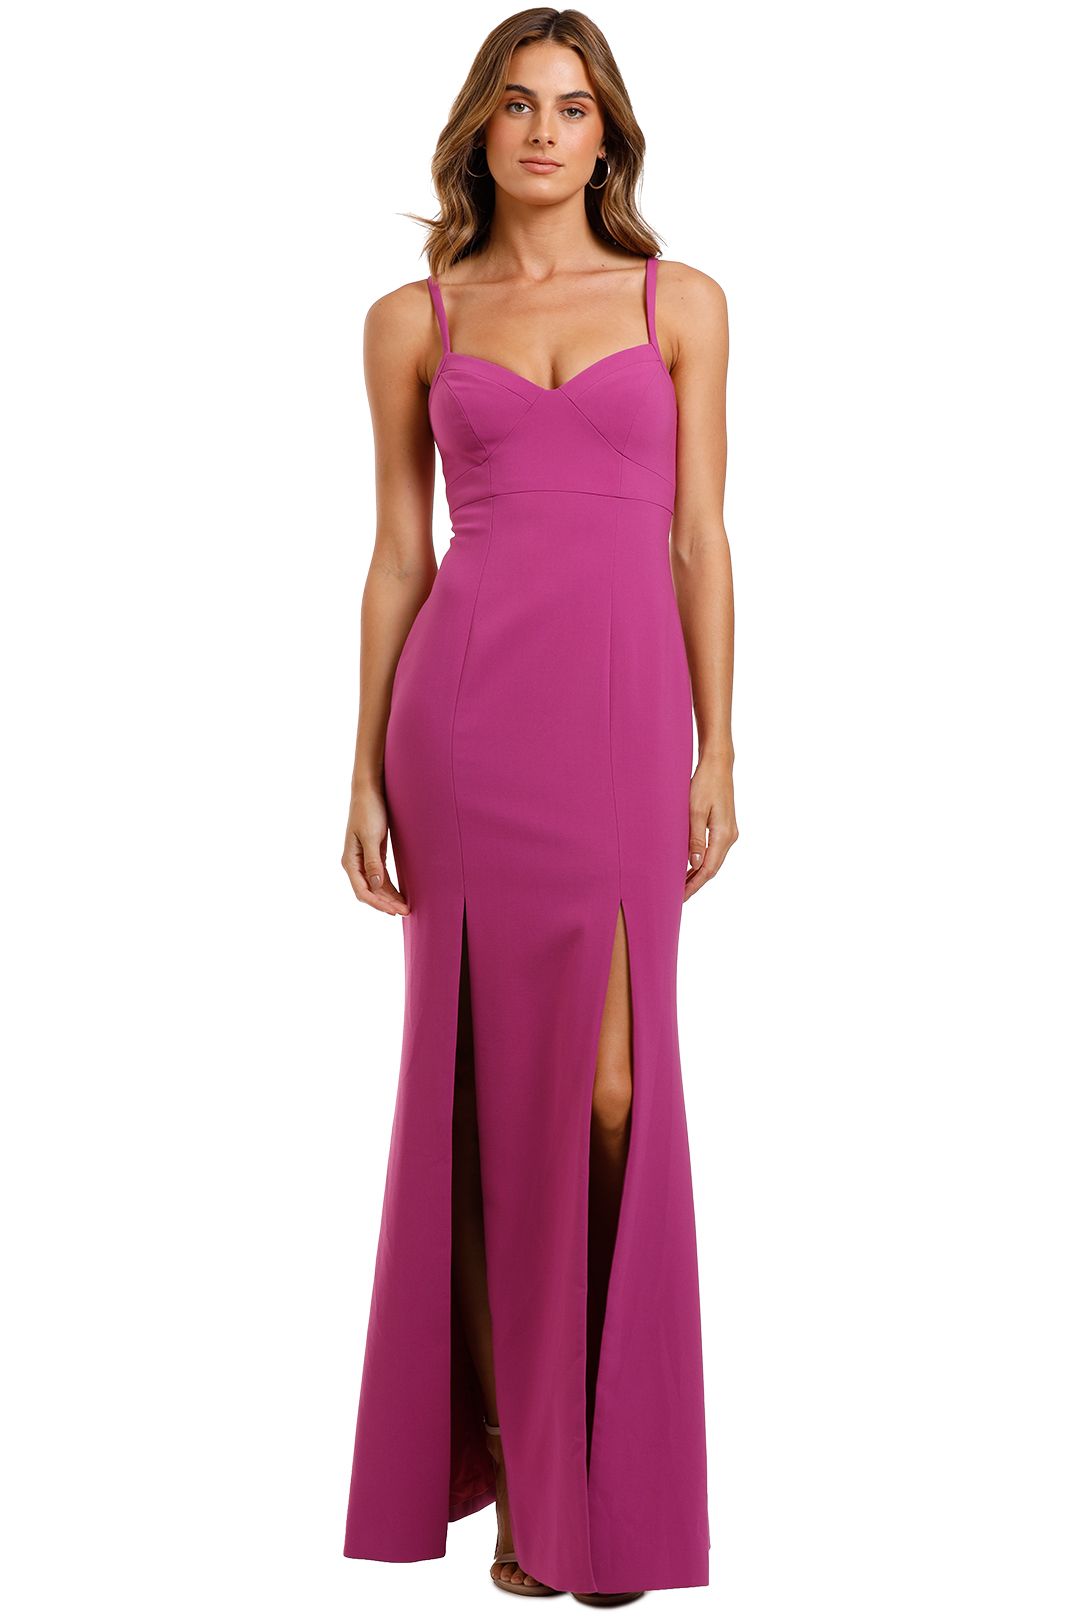 Likely NYC Alameda Gown Fuschia